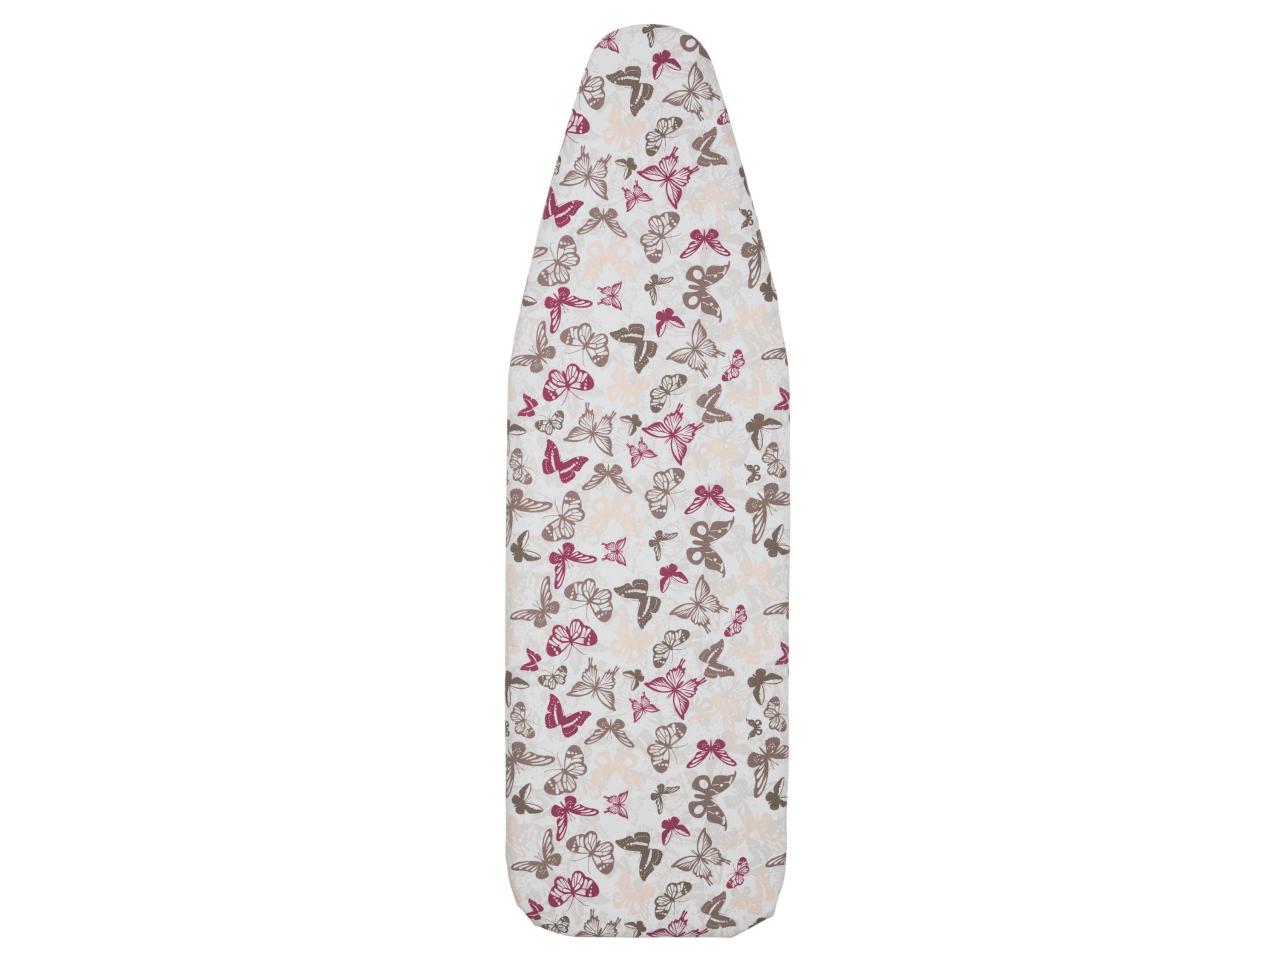 Ironing Board Cover, 3 layers